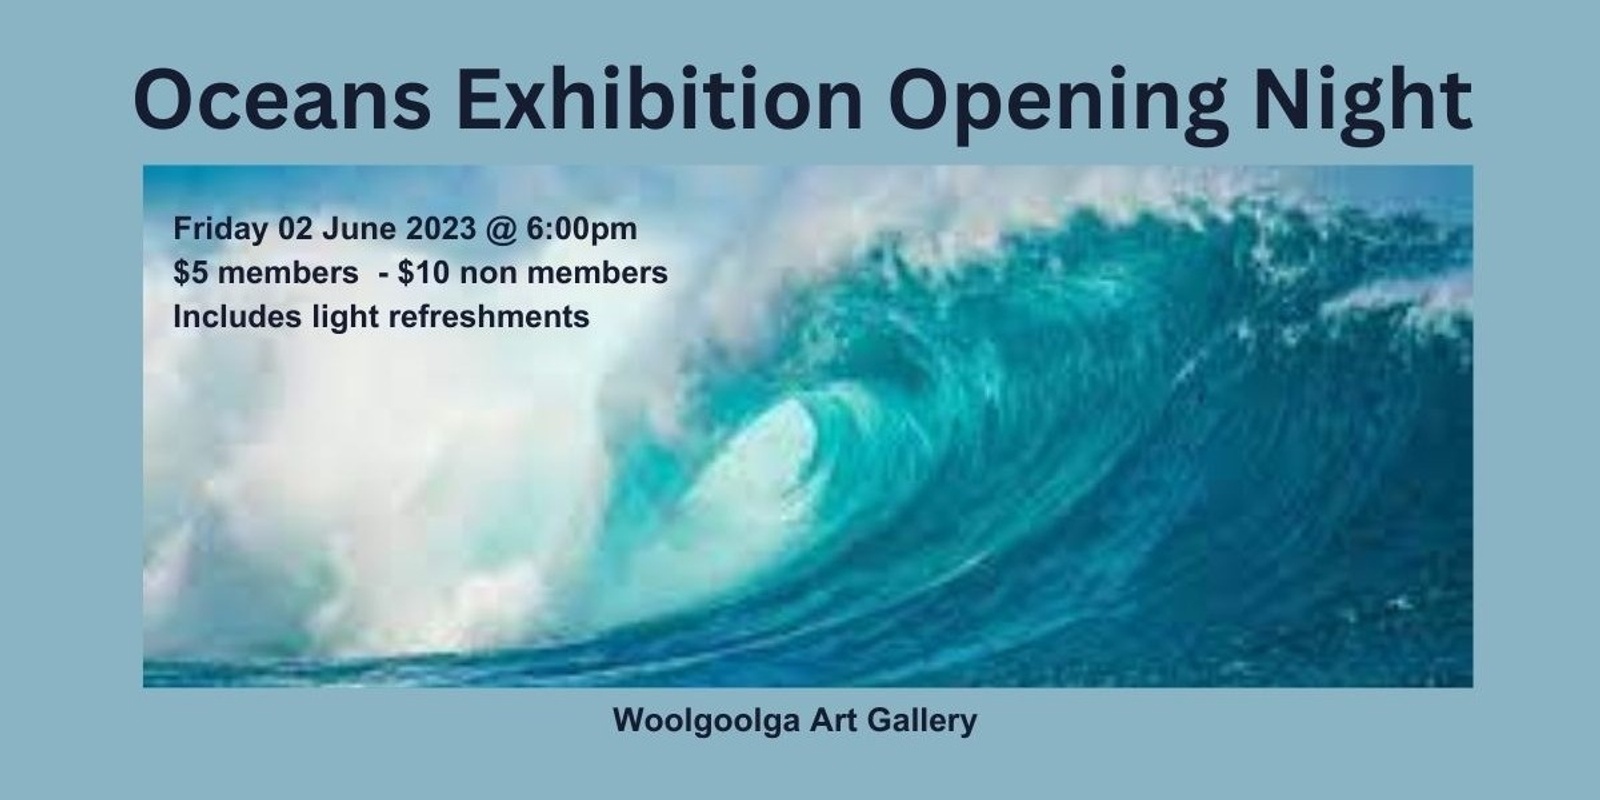 Banner image for Oceans Exhibition Opening Friday 02 June 2023